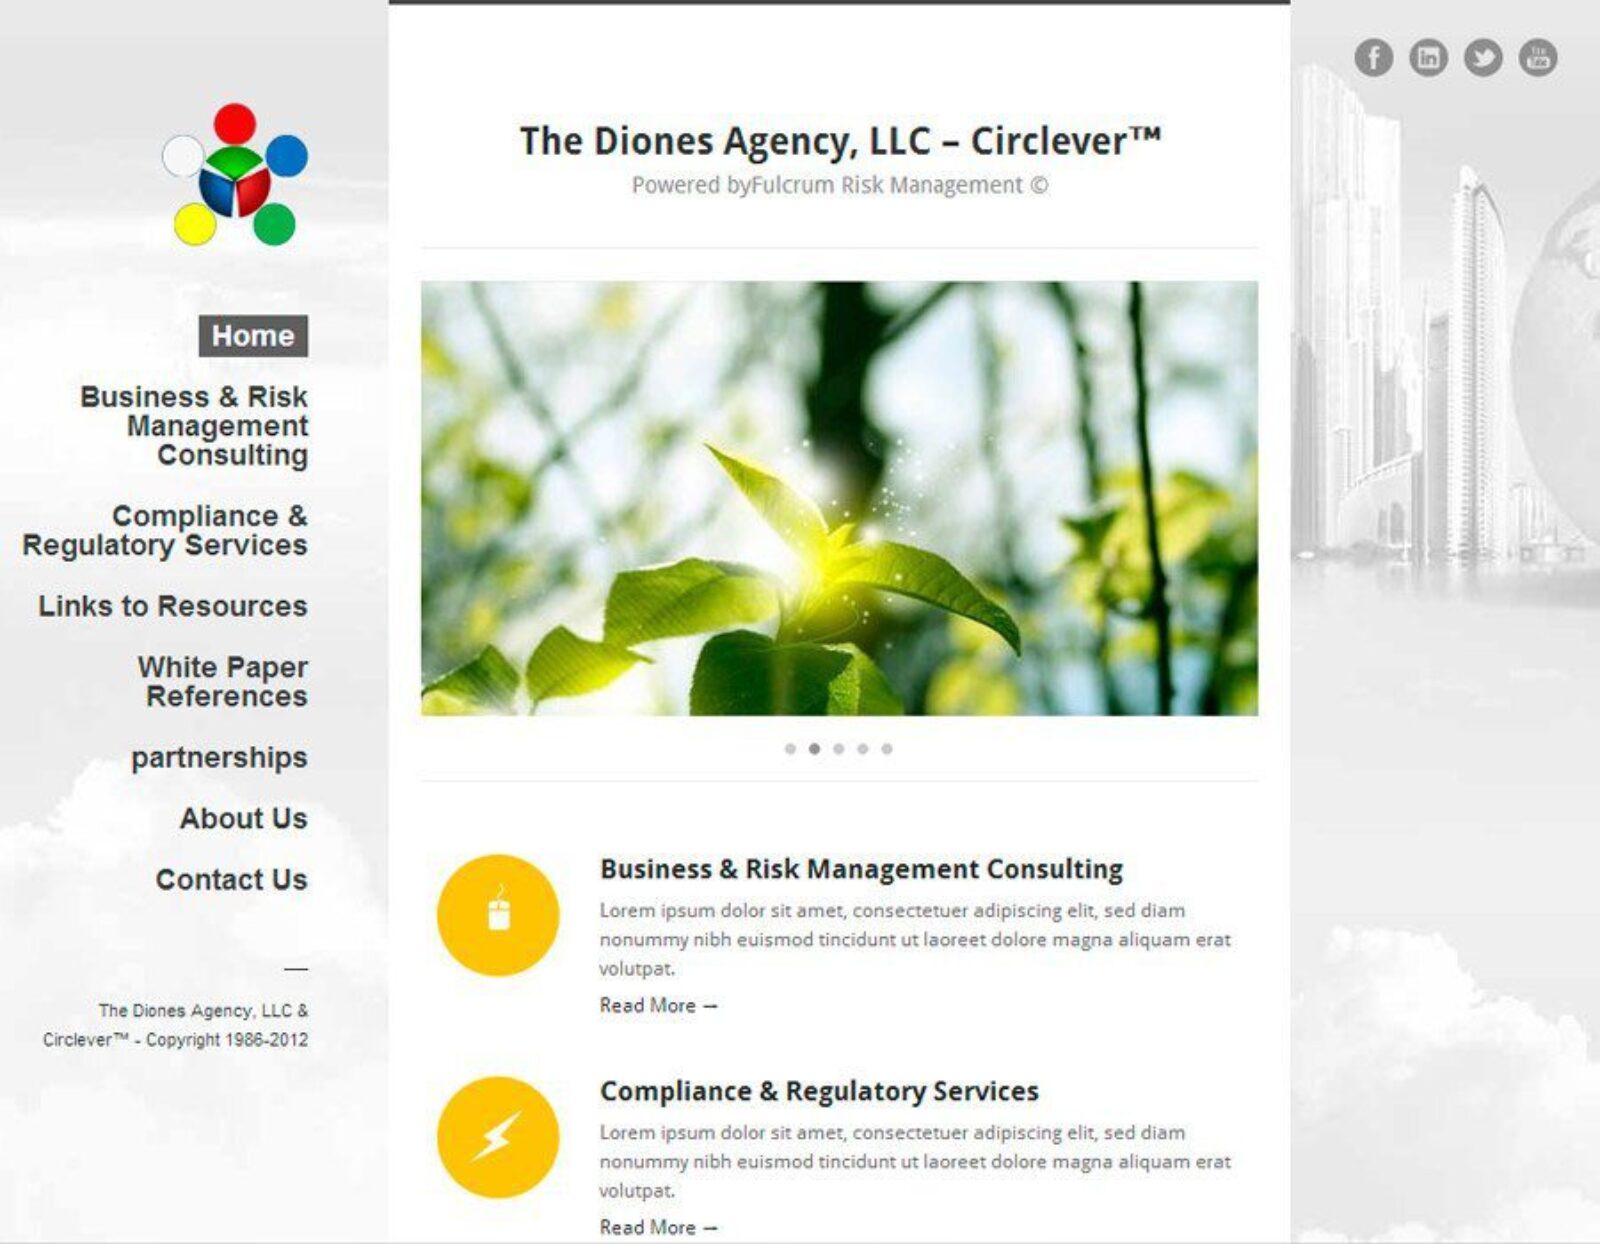 The Diones Agency, LLC - Circlever